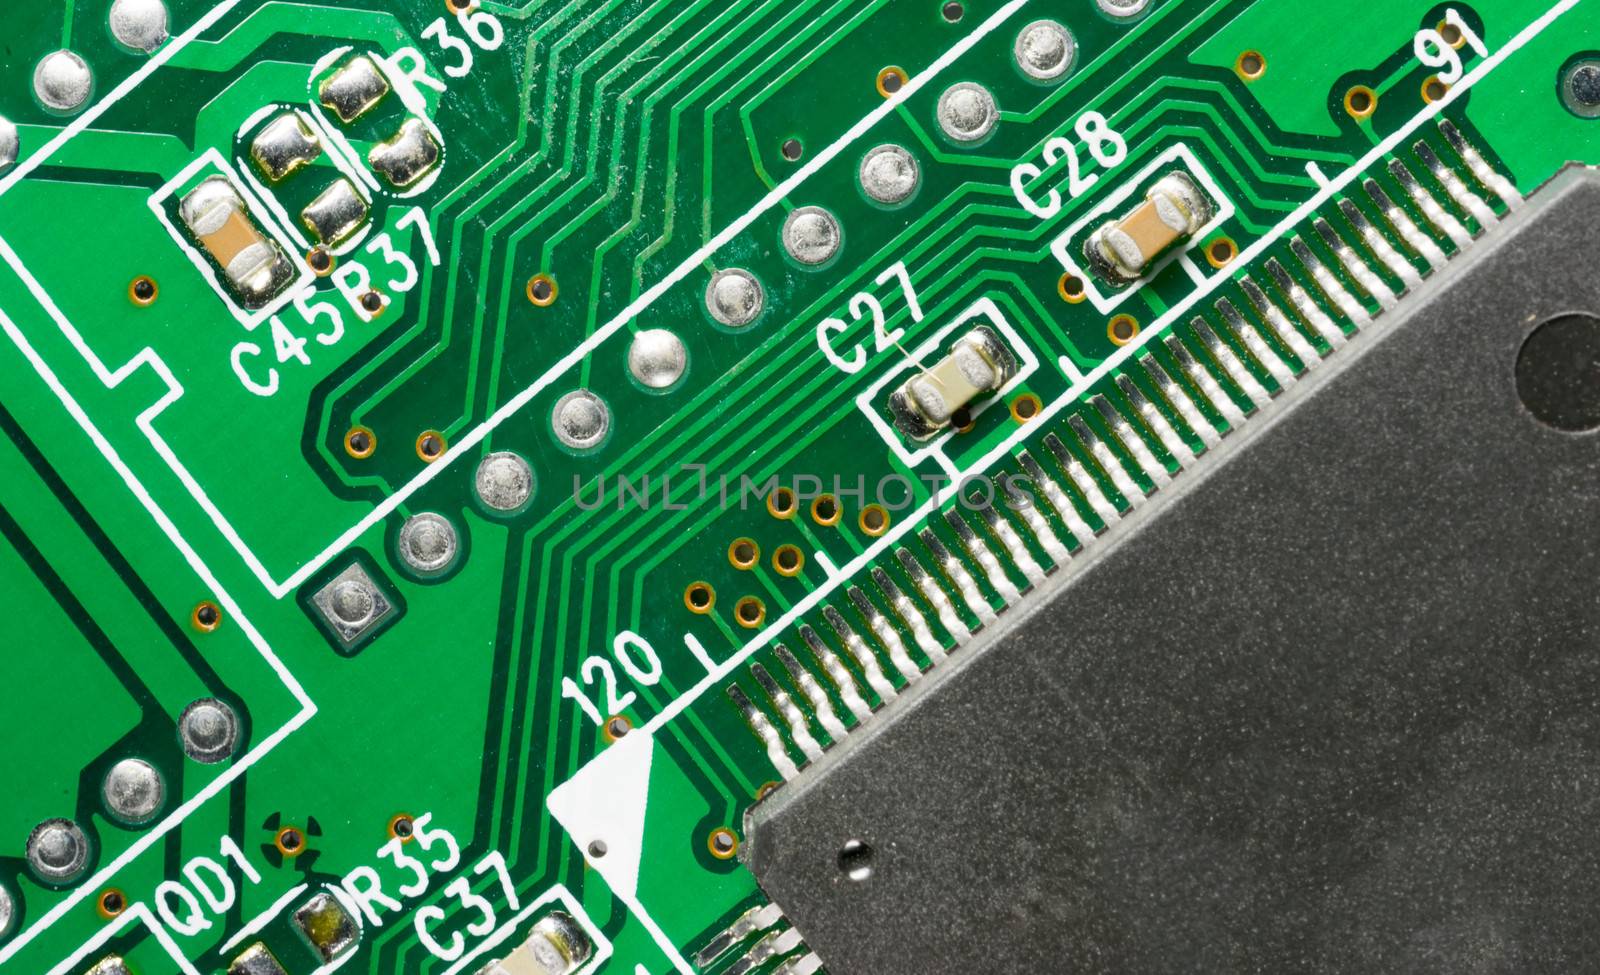 Computer Component Circuit Board Memory Processor Networking Card by ChrisBoswell